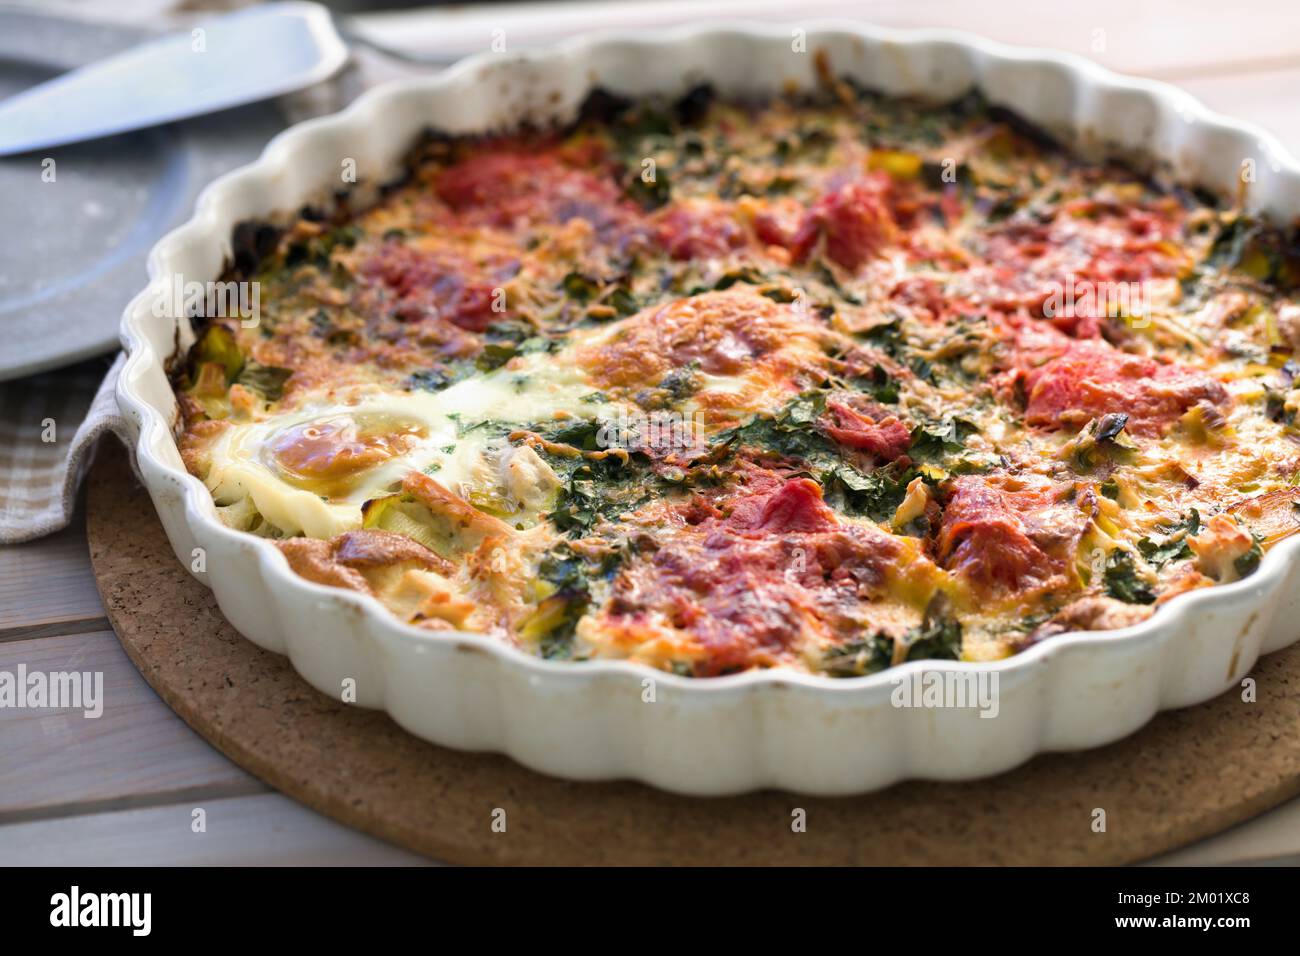 Egg, spinach, and tomatoes gratin Stock Photo